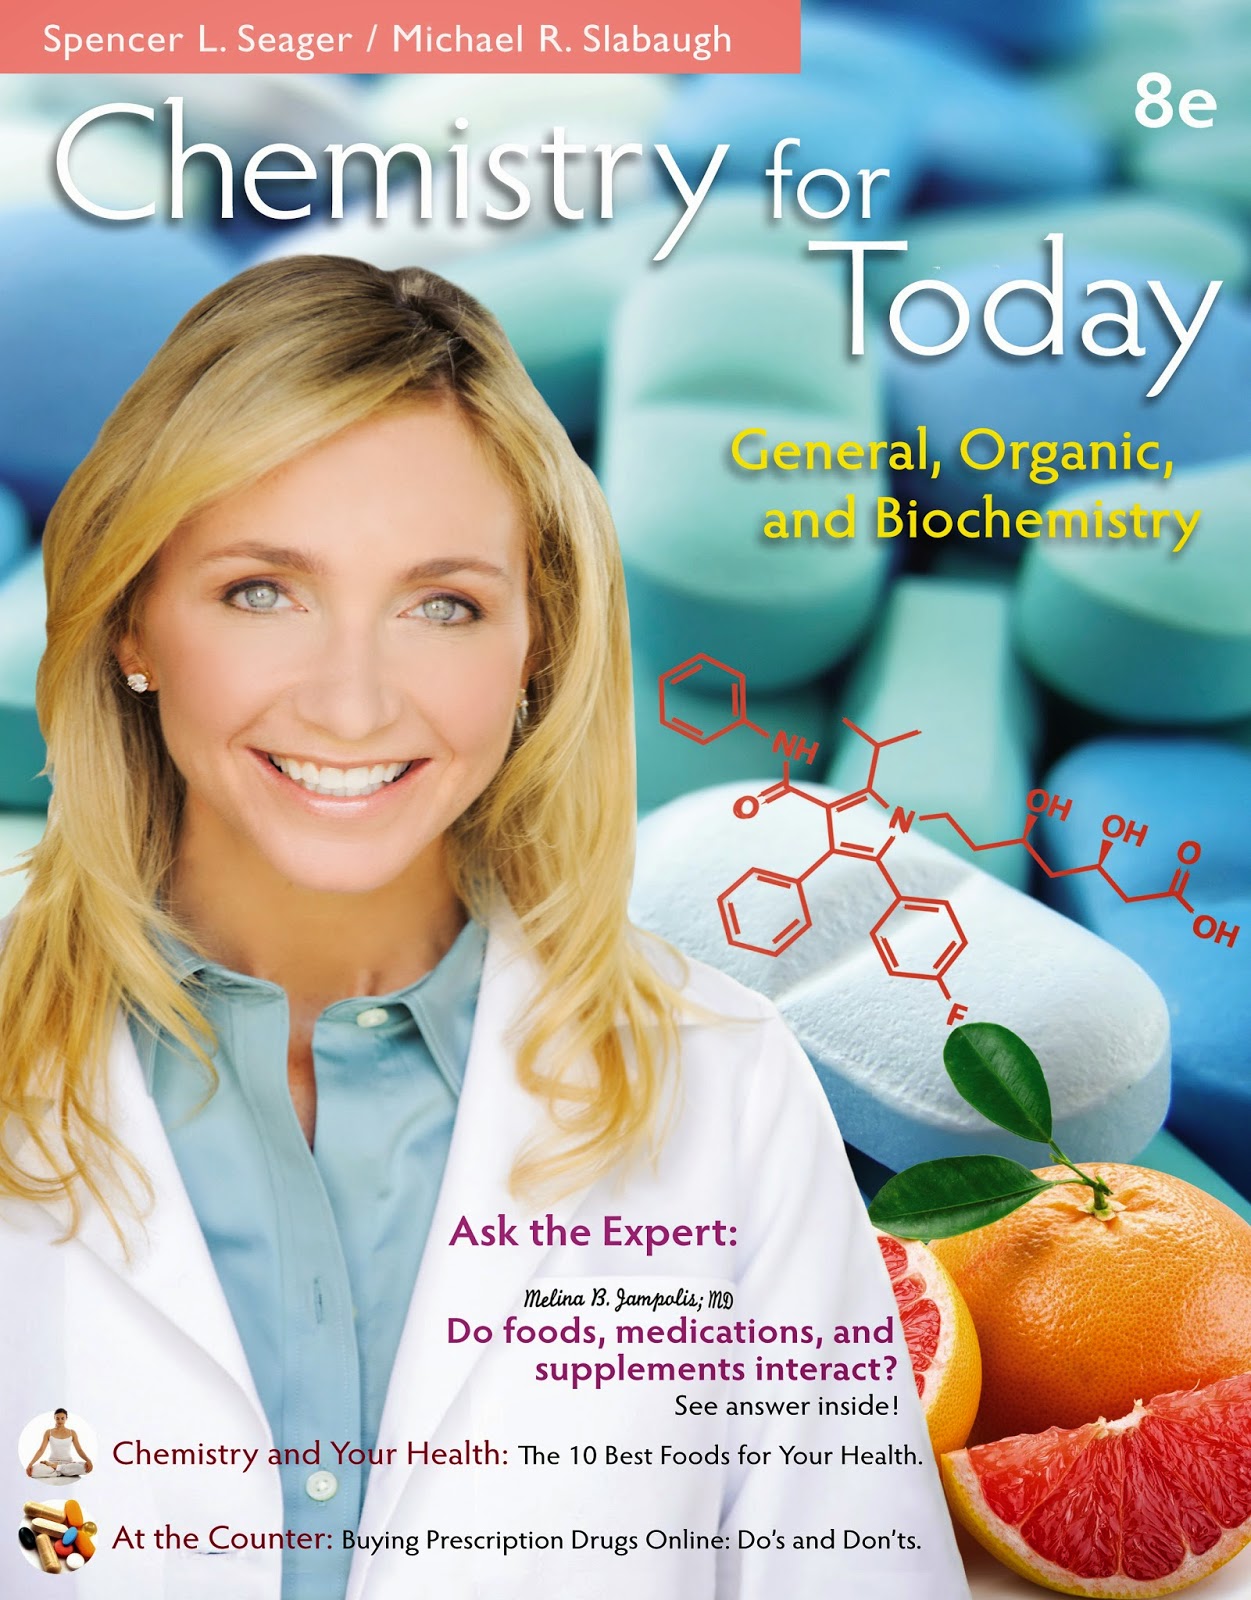 http://kingcheapebook.blogspot.com/2014/07/chemistry-for-today-general-organic-and.html